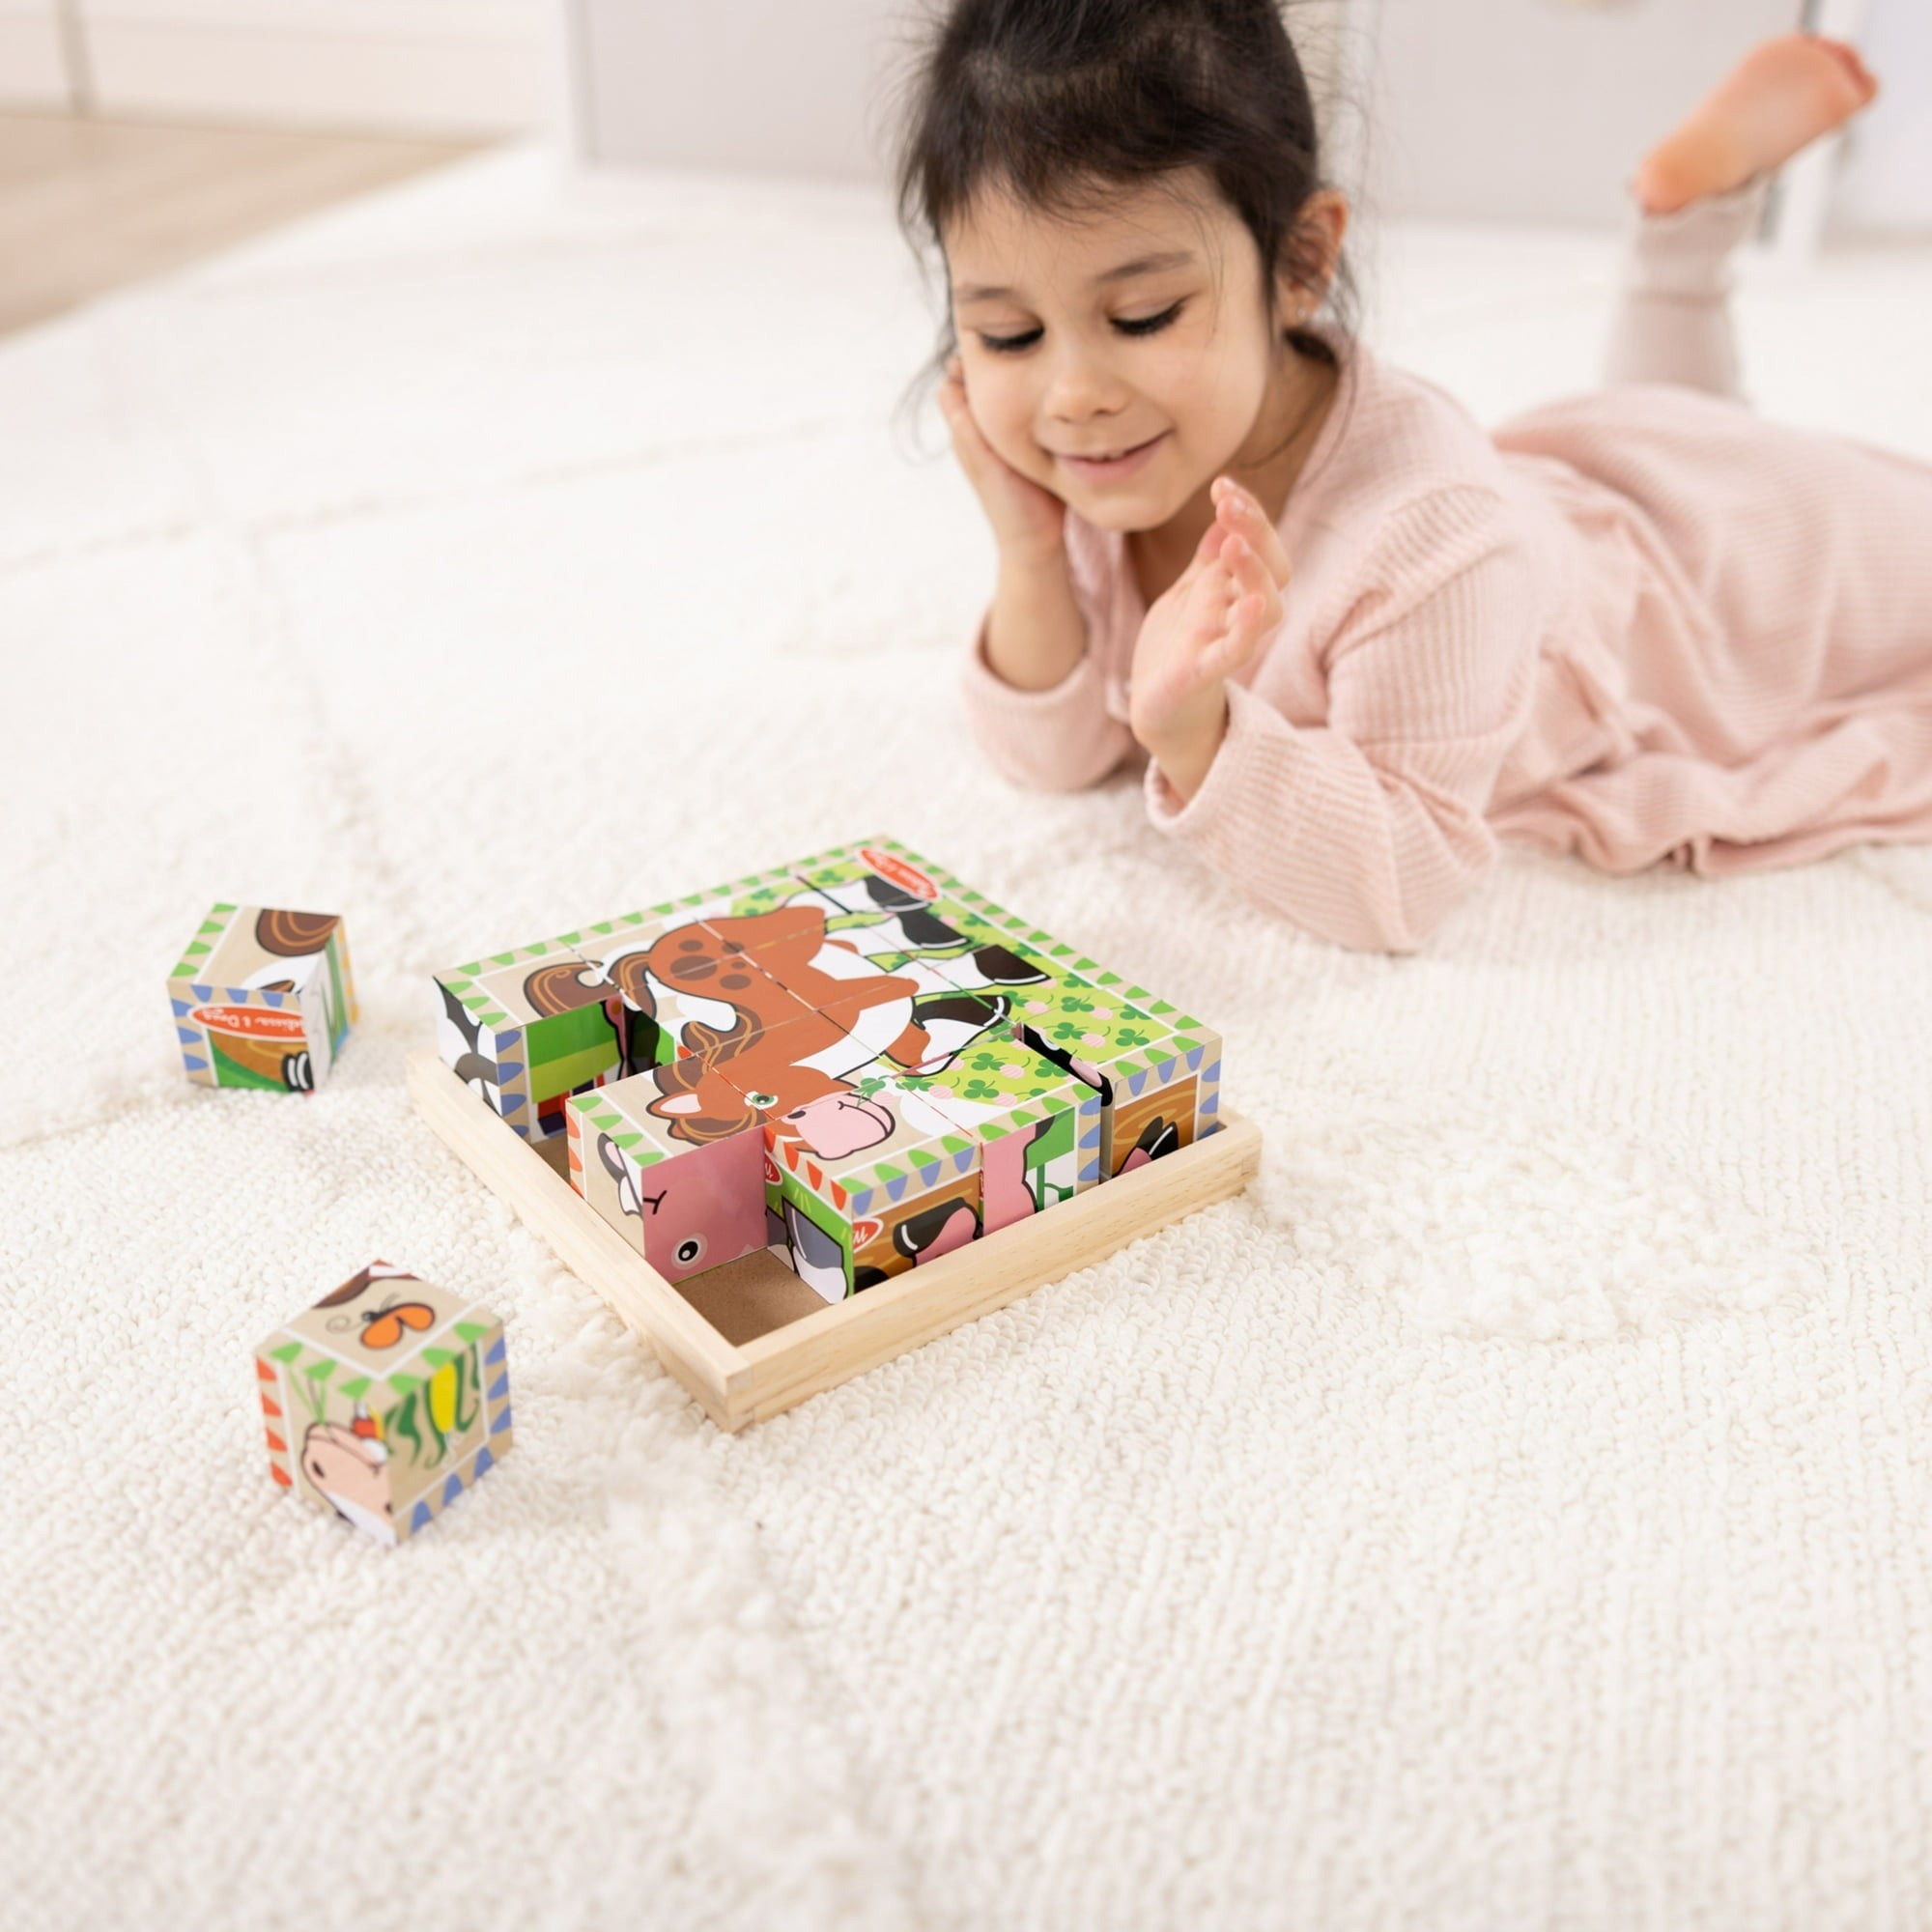 Little girl on the floor playing with the wooden block puzzle.